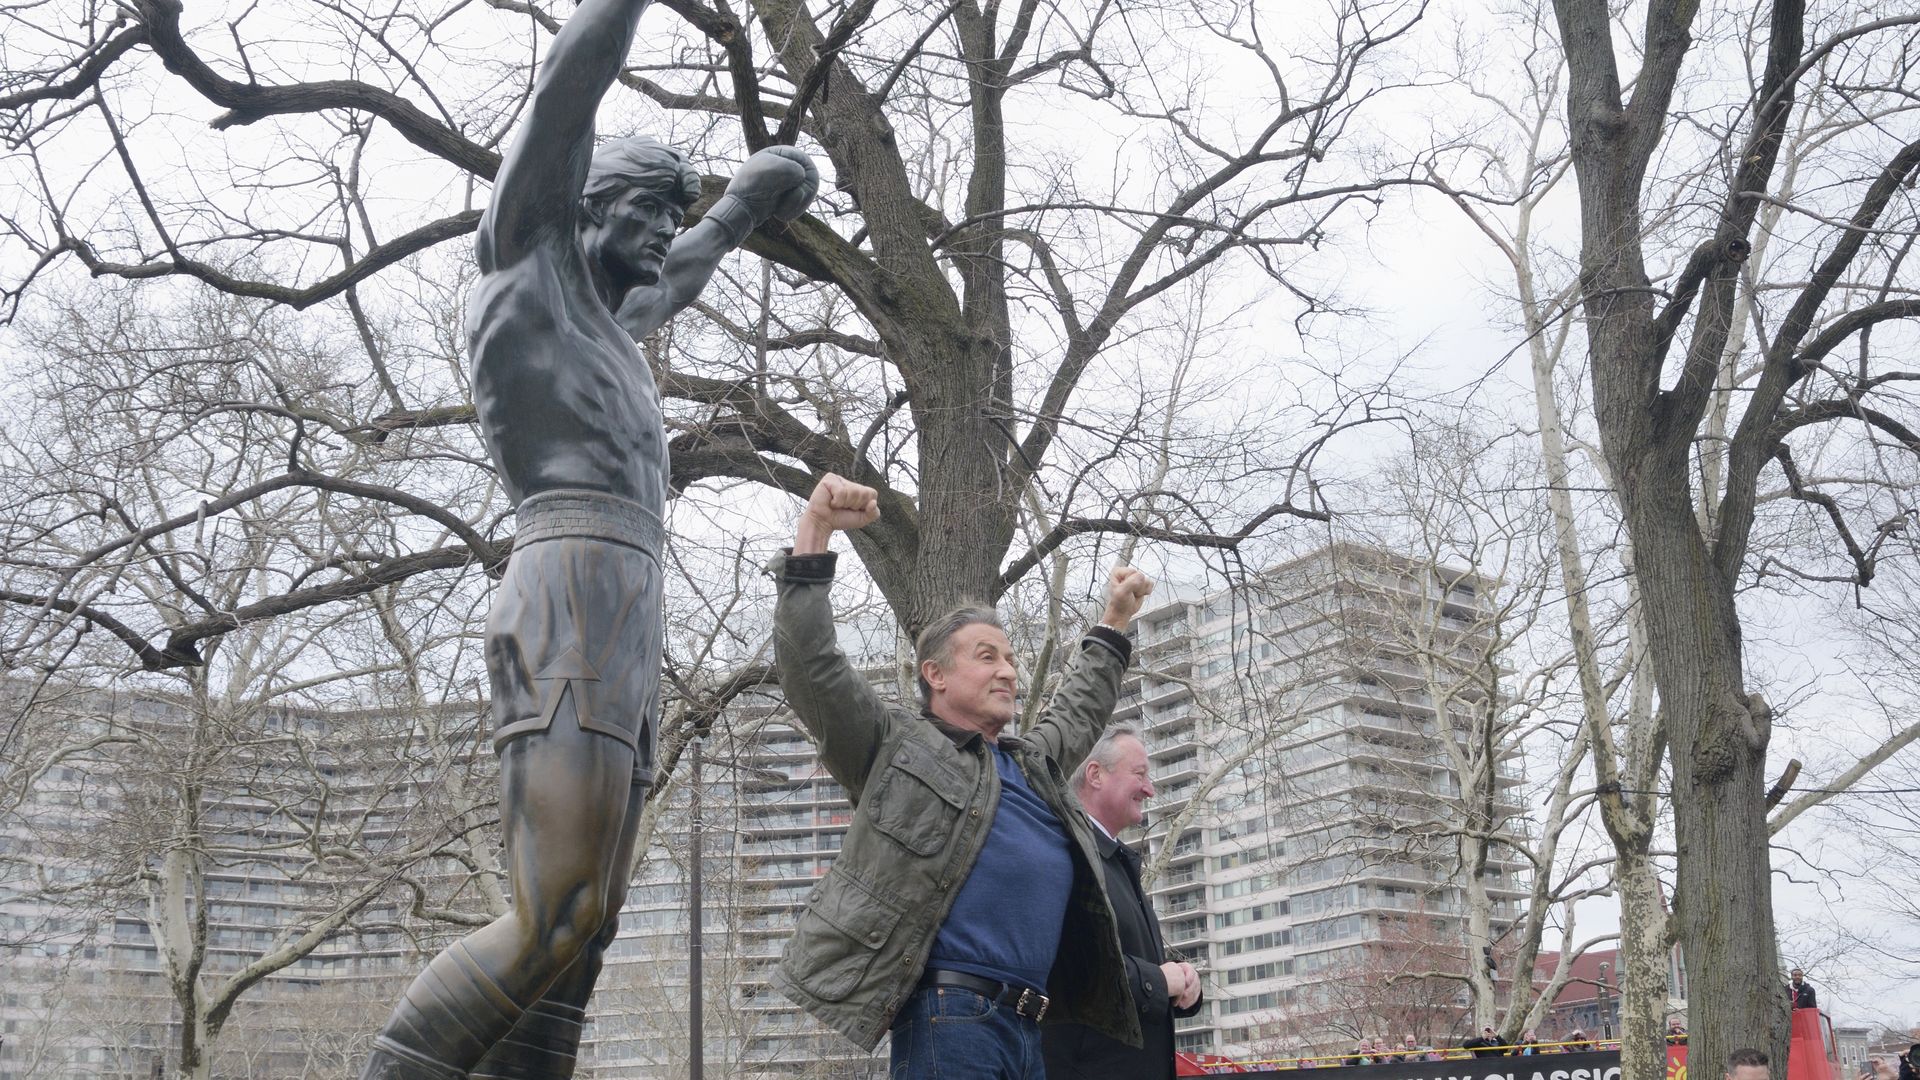 Actor Sylvester and Philadelphia Mayor Jim Kenney at the Rocky statue.